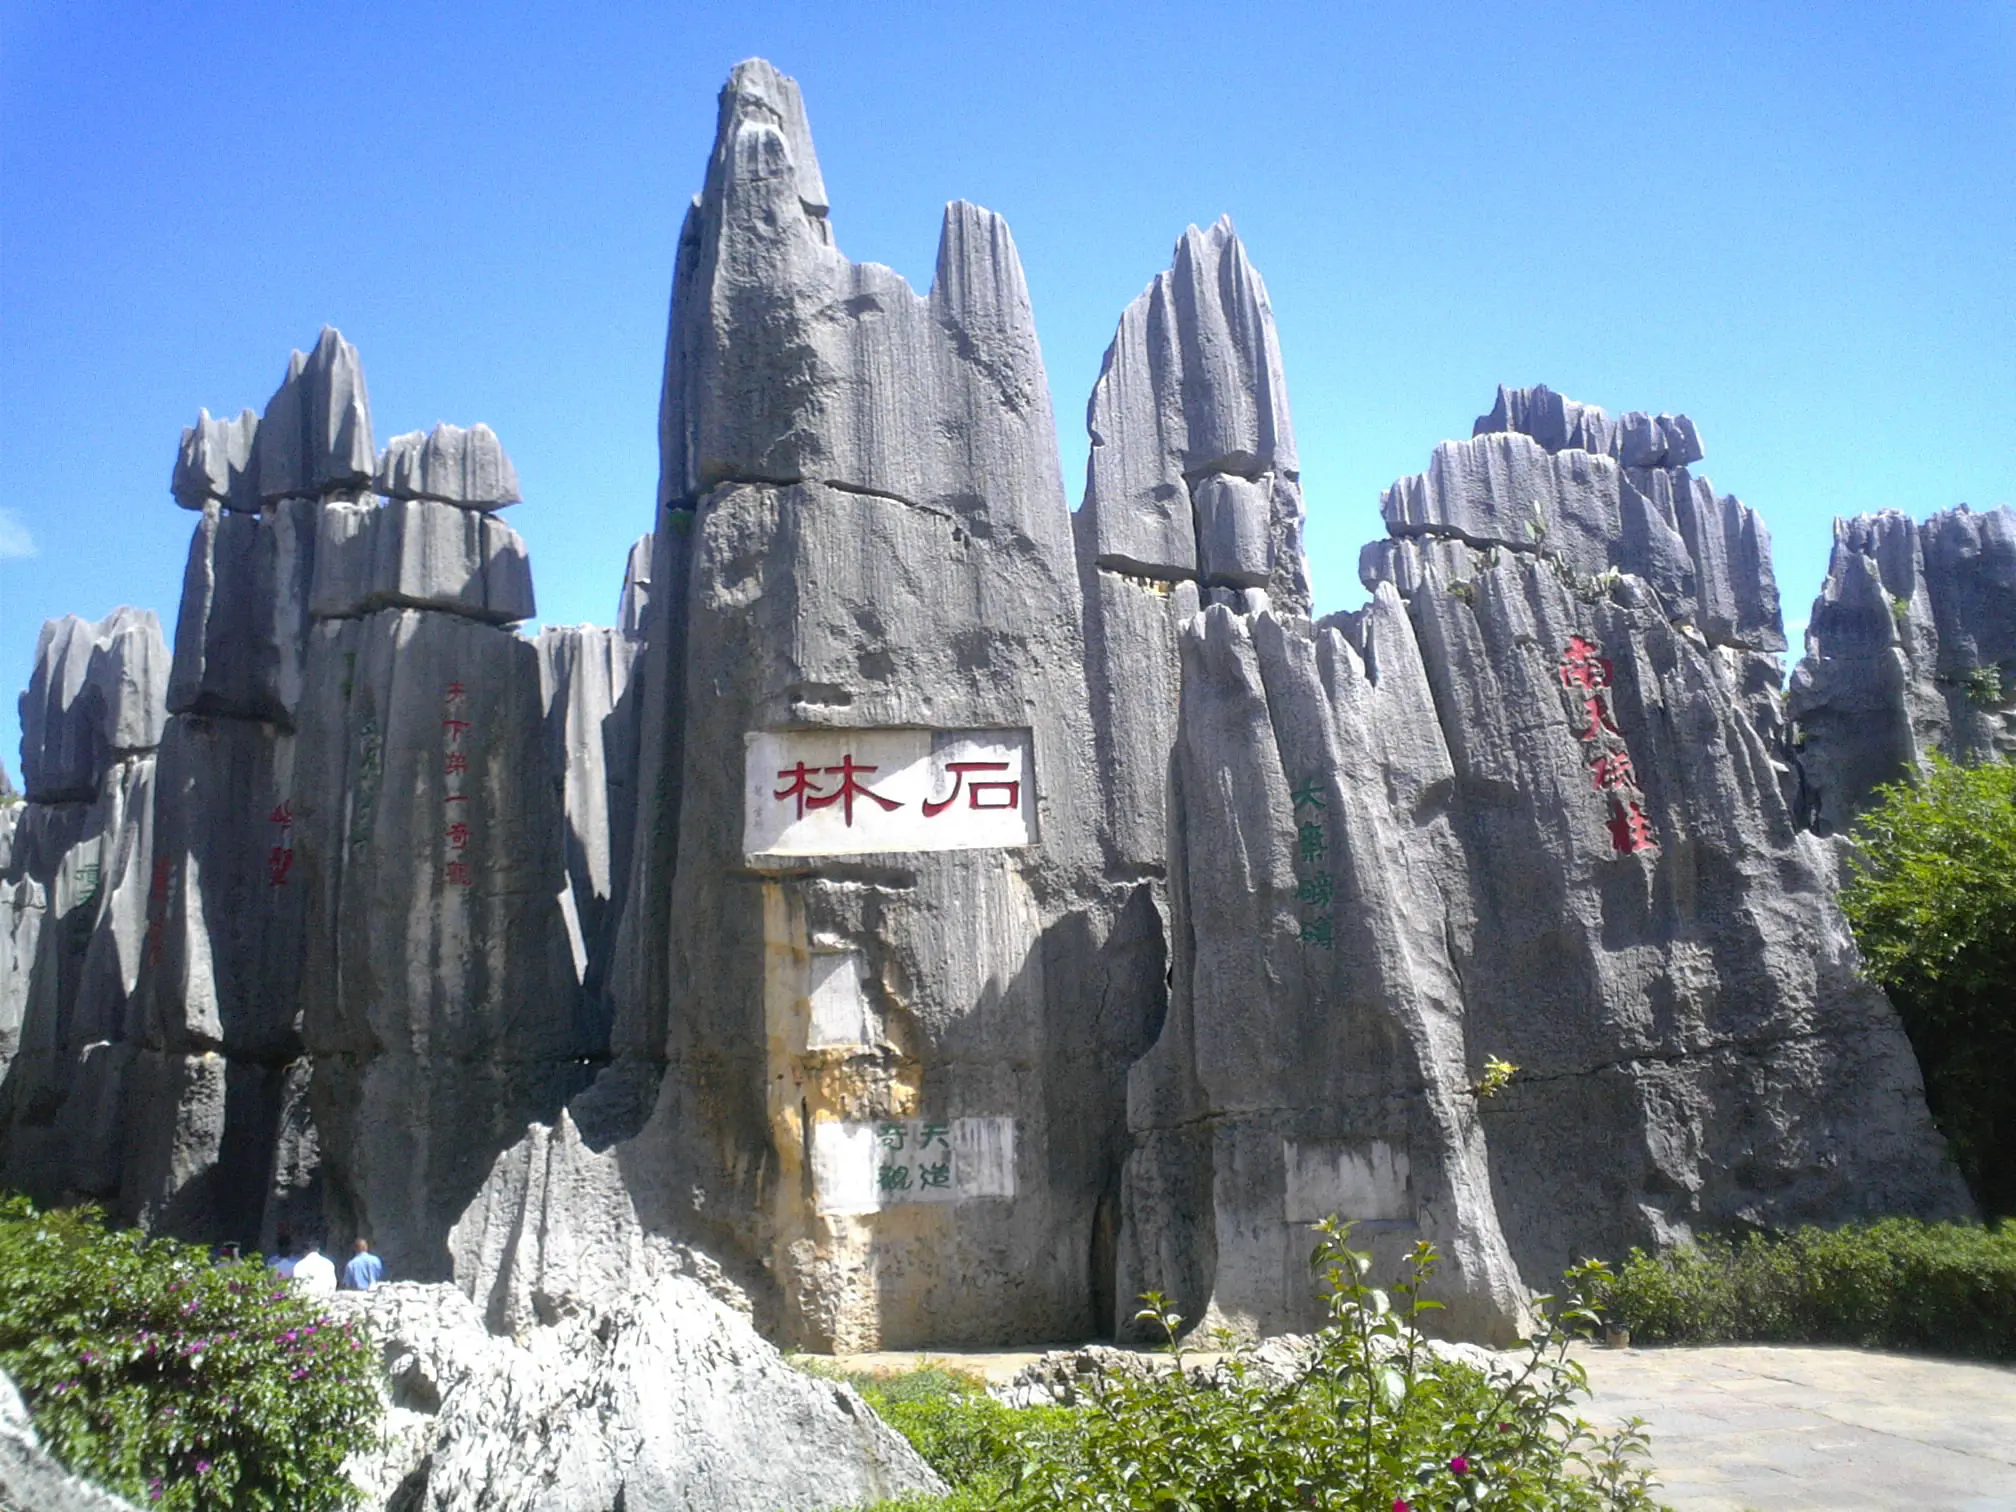 The Stone Forest (Wikimedia Commons)